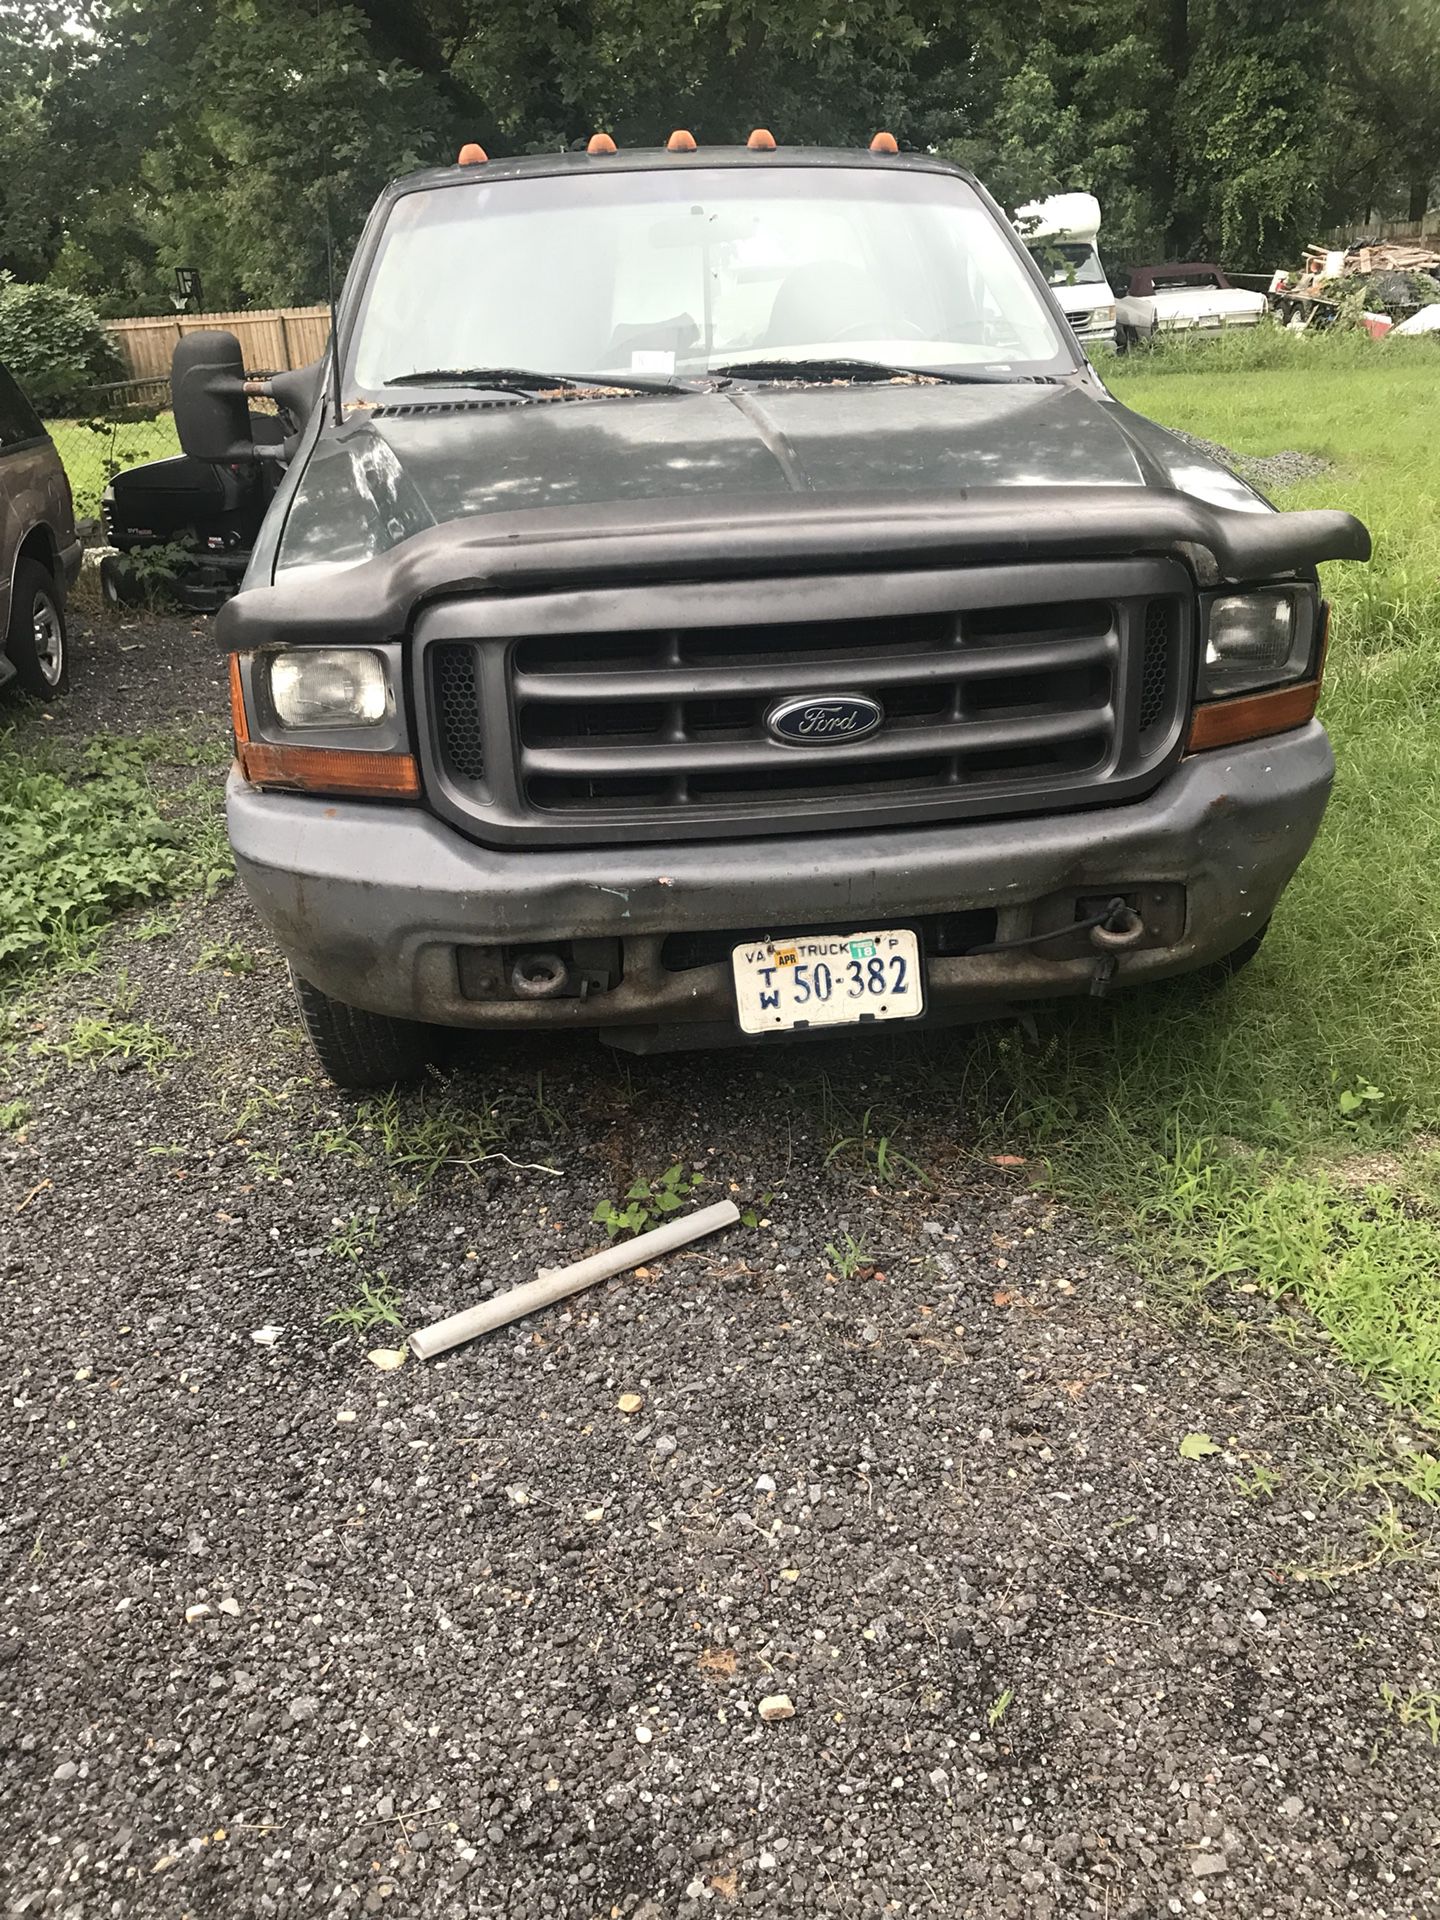 2000 Ford F-350